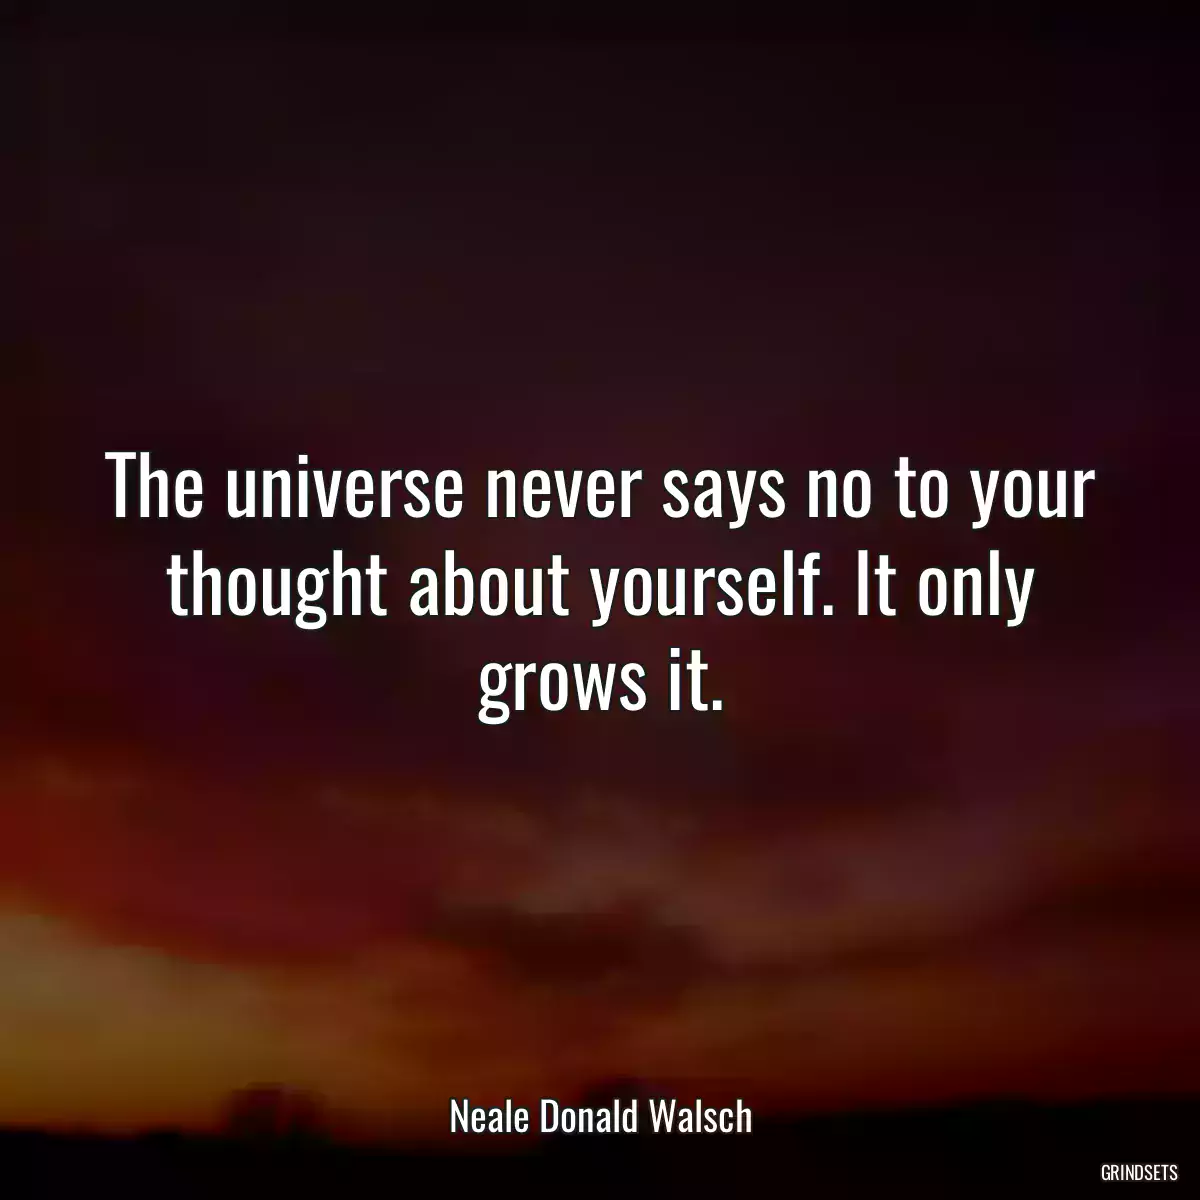 The universe never says no to your thought about yourself. It only grows it.